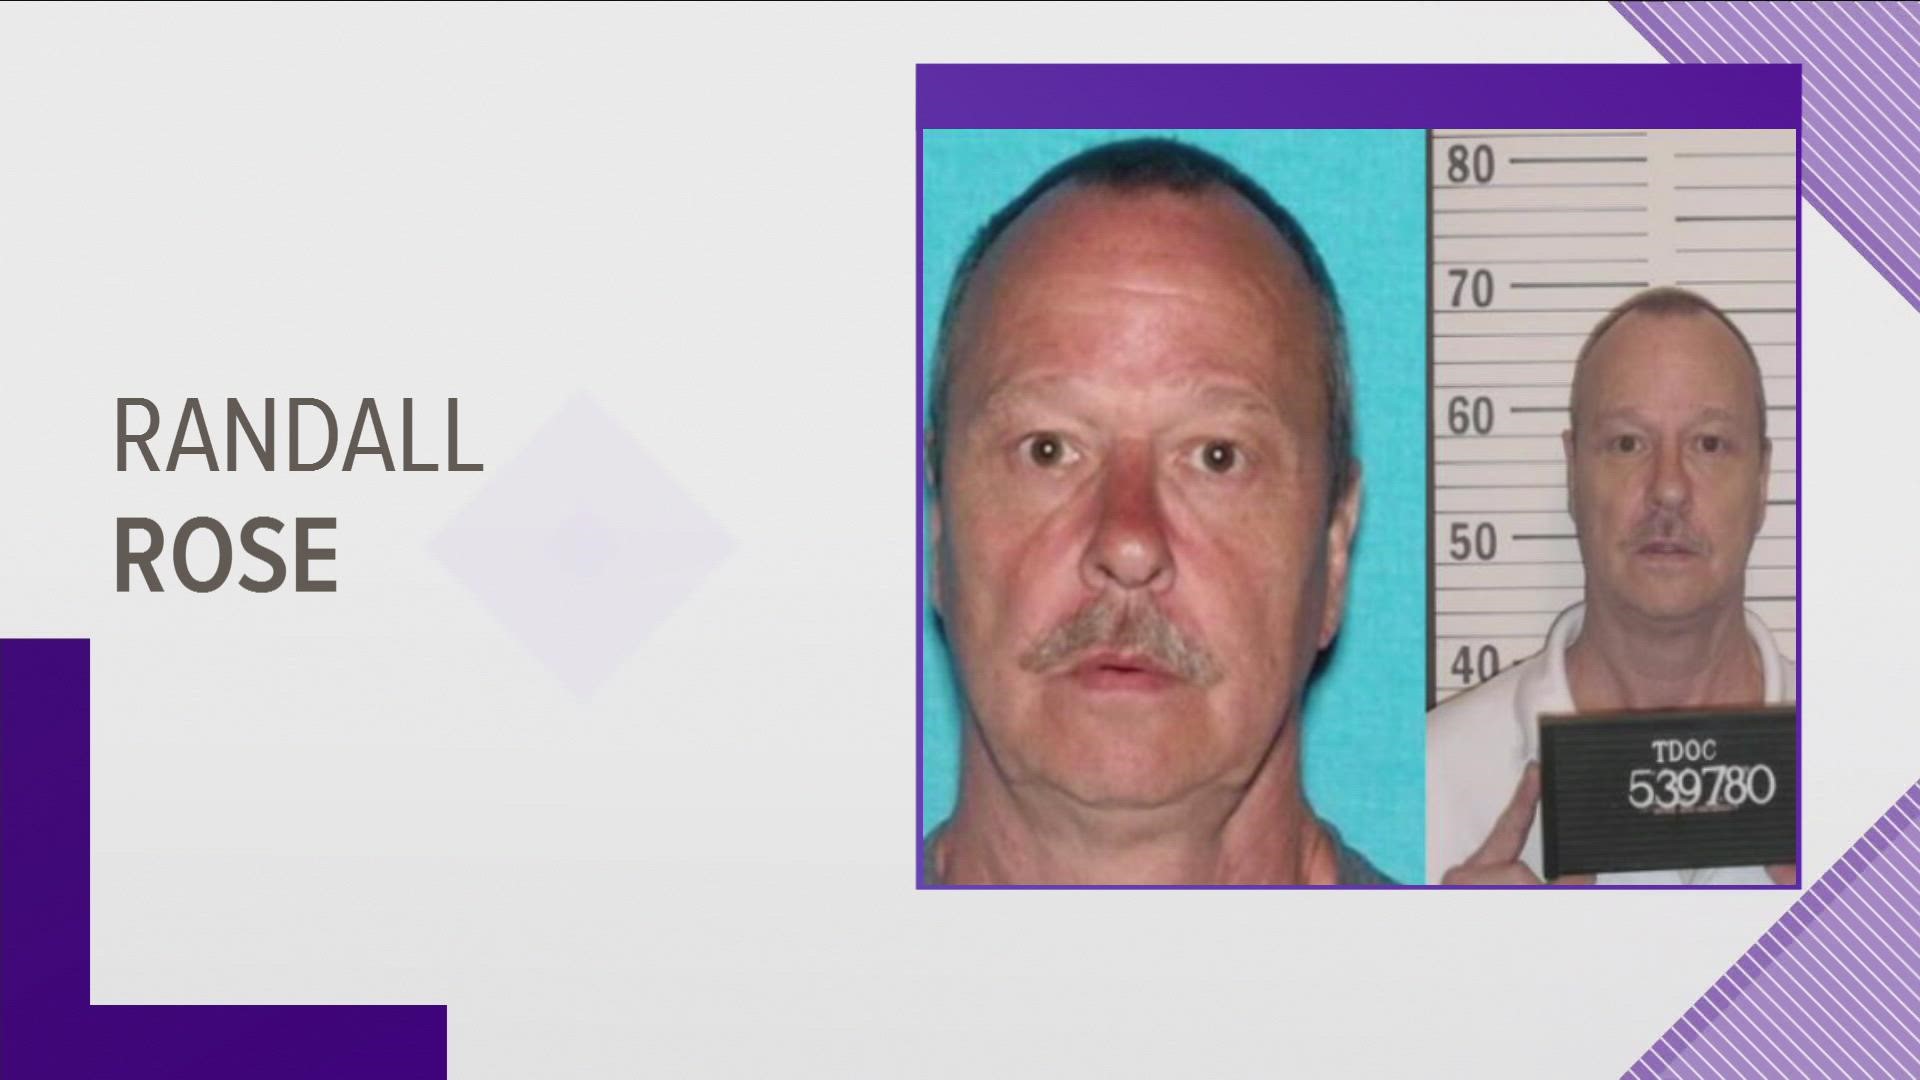 A man wanted for killing a 70-year-old woman in Jackson, Tenn., may be in East Tennessee.